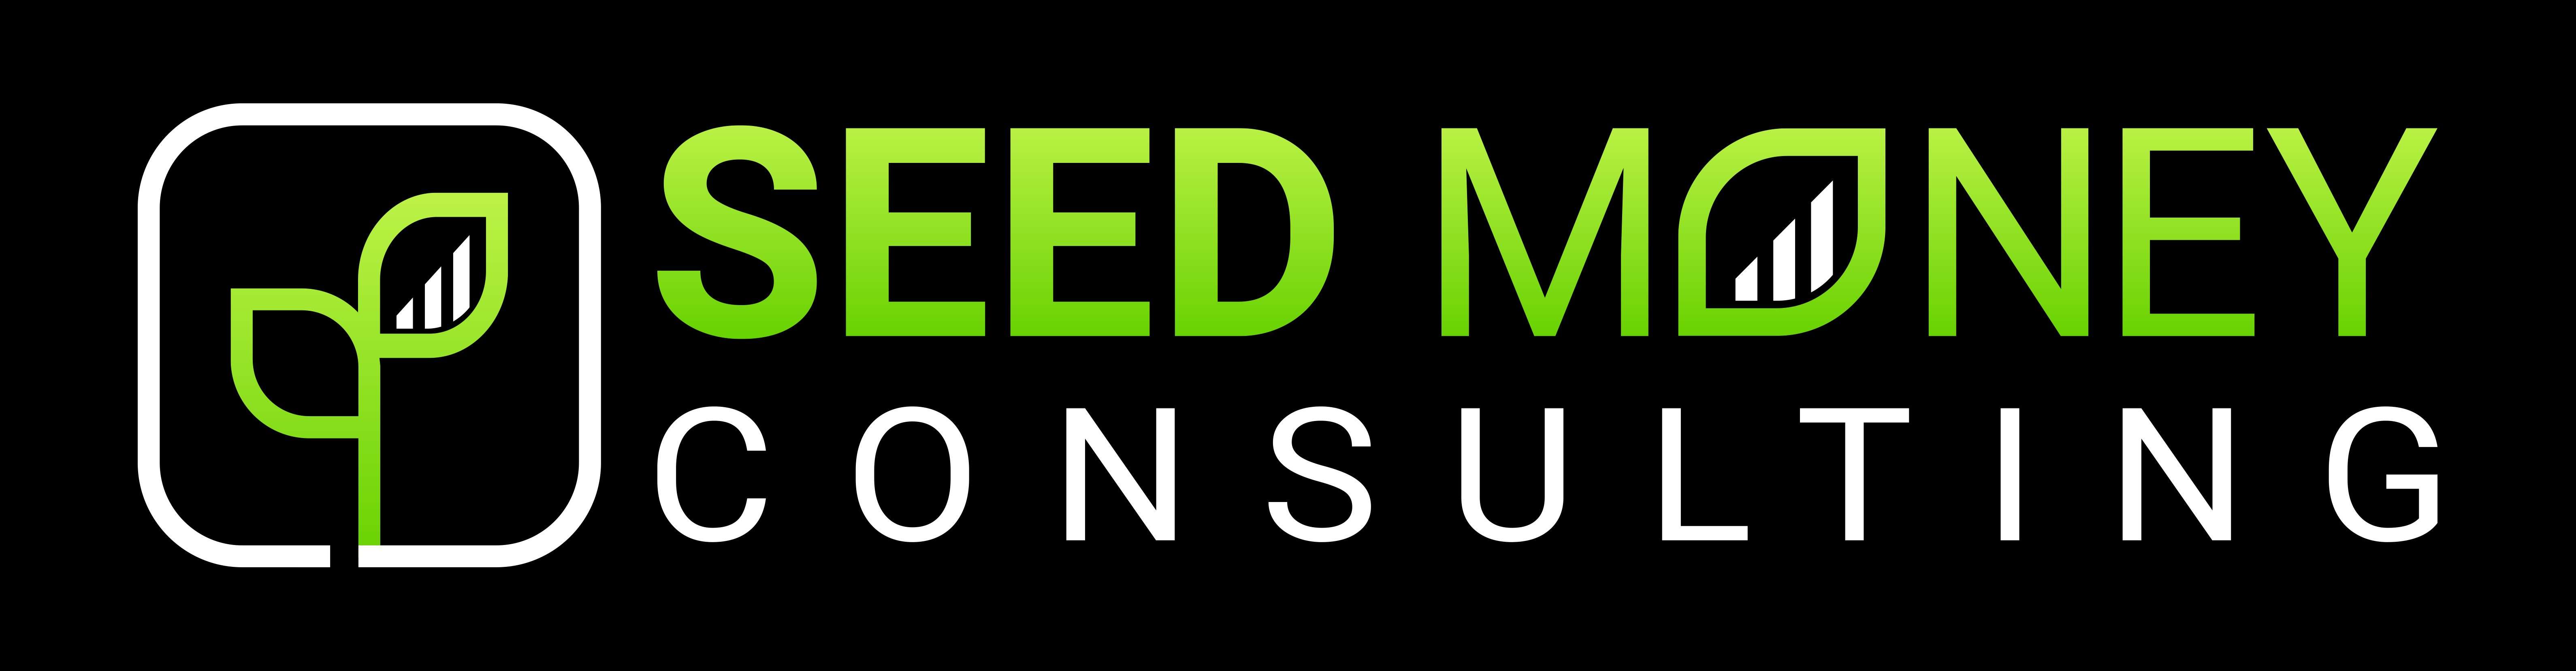 Seed Money Consulting Logo